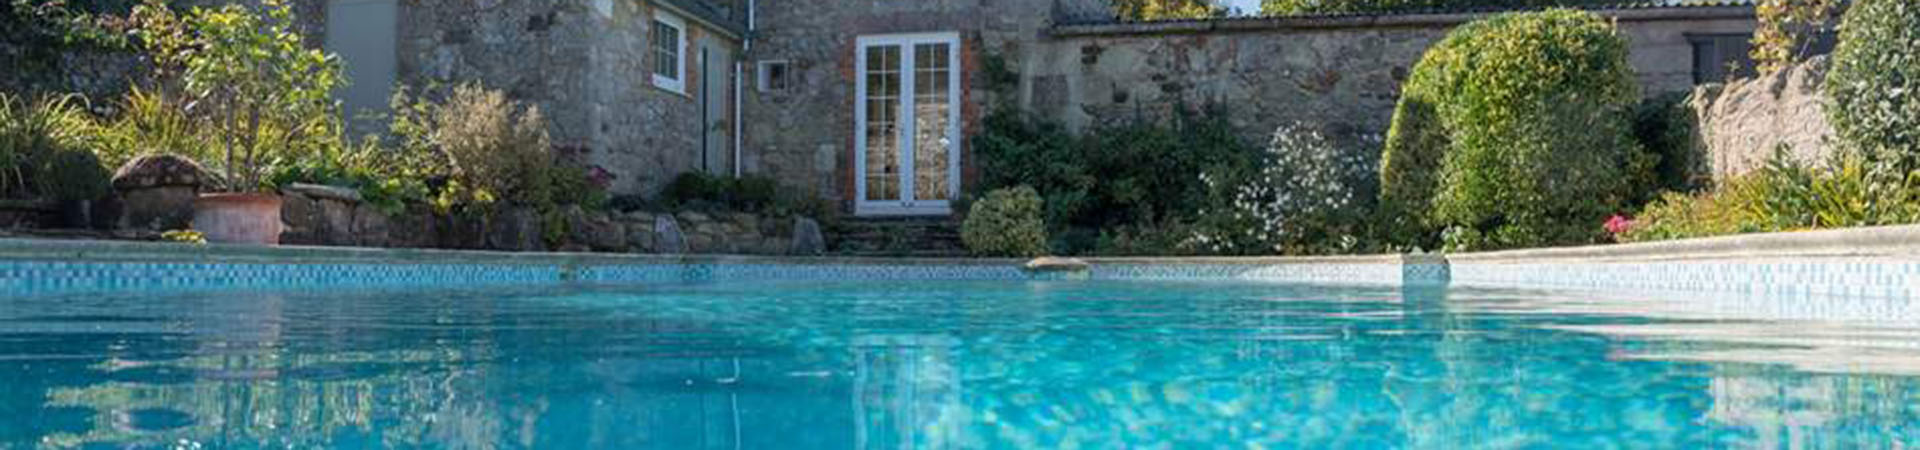 Cottages with pools in Yorkshire